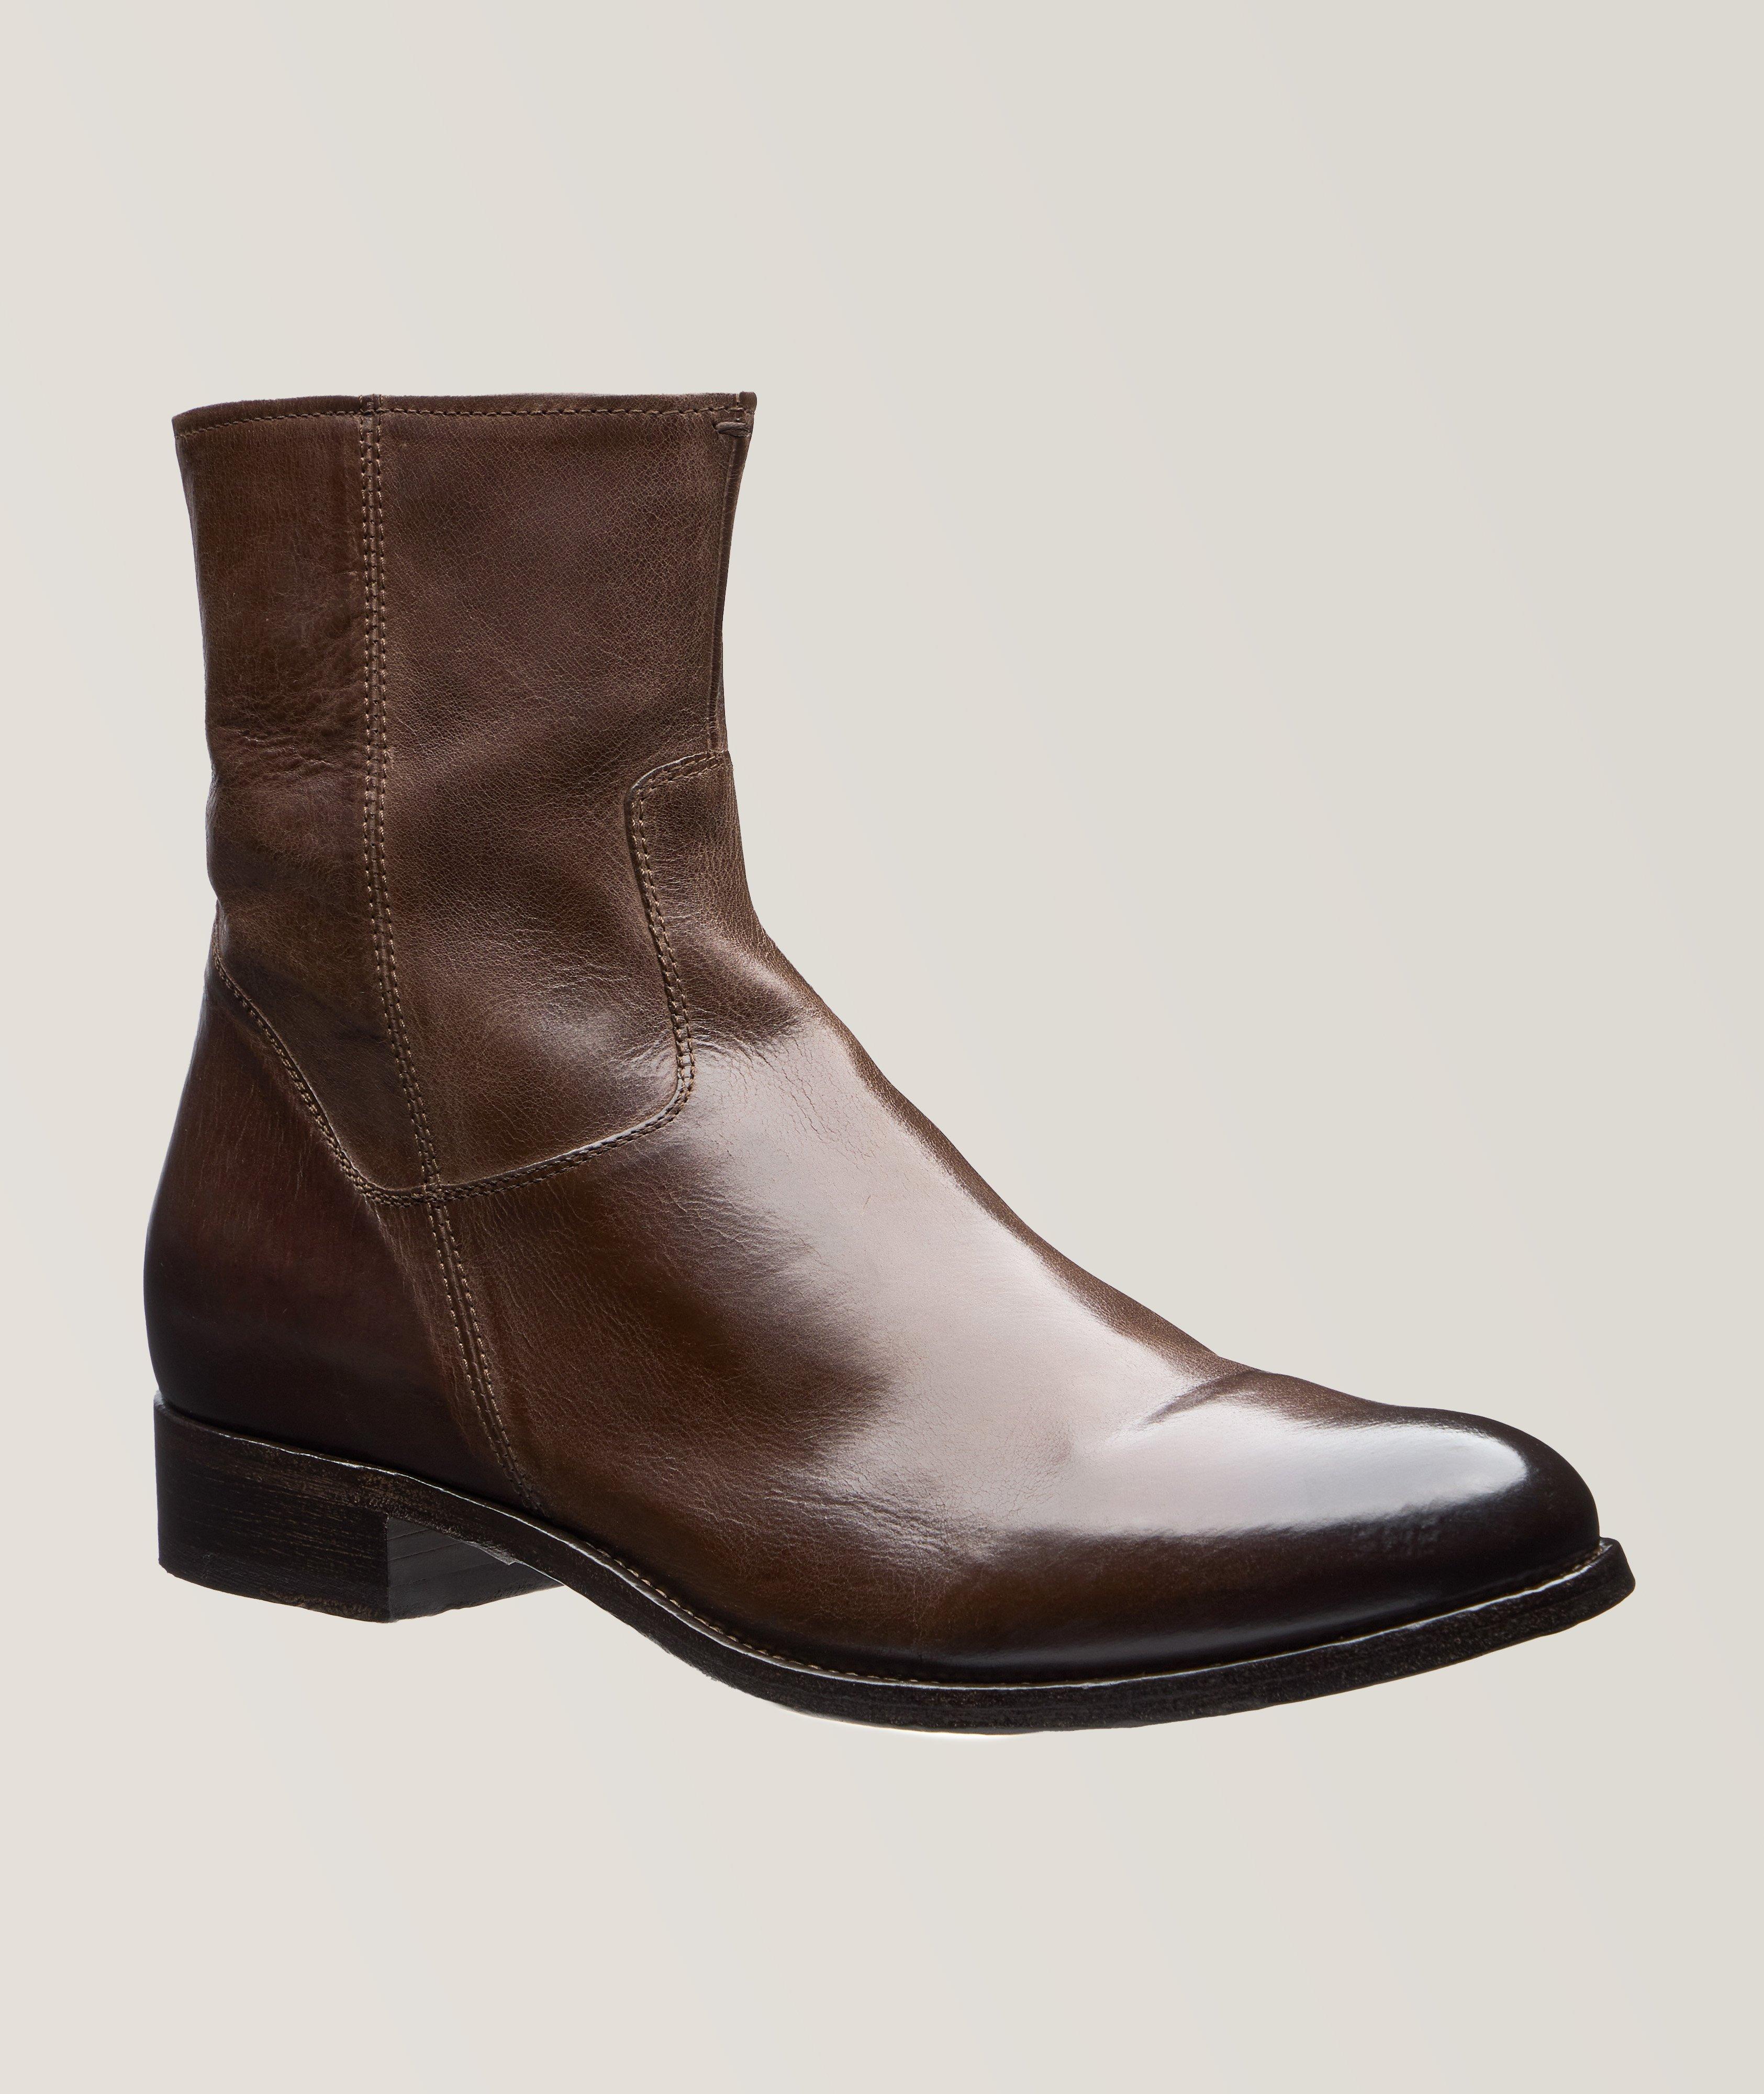 Belvedere Leather Western Boots image 0